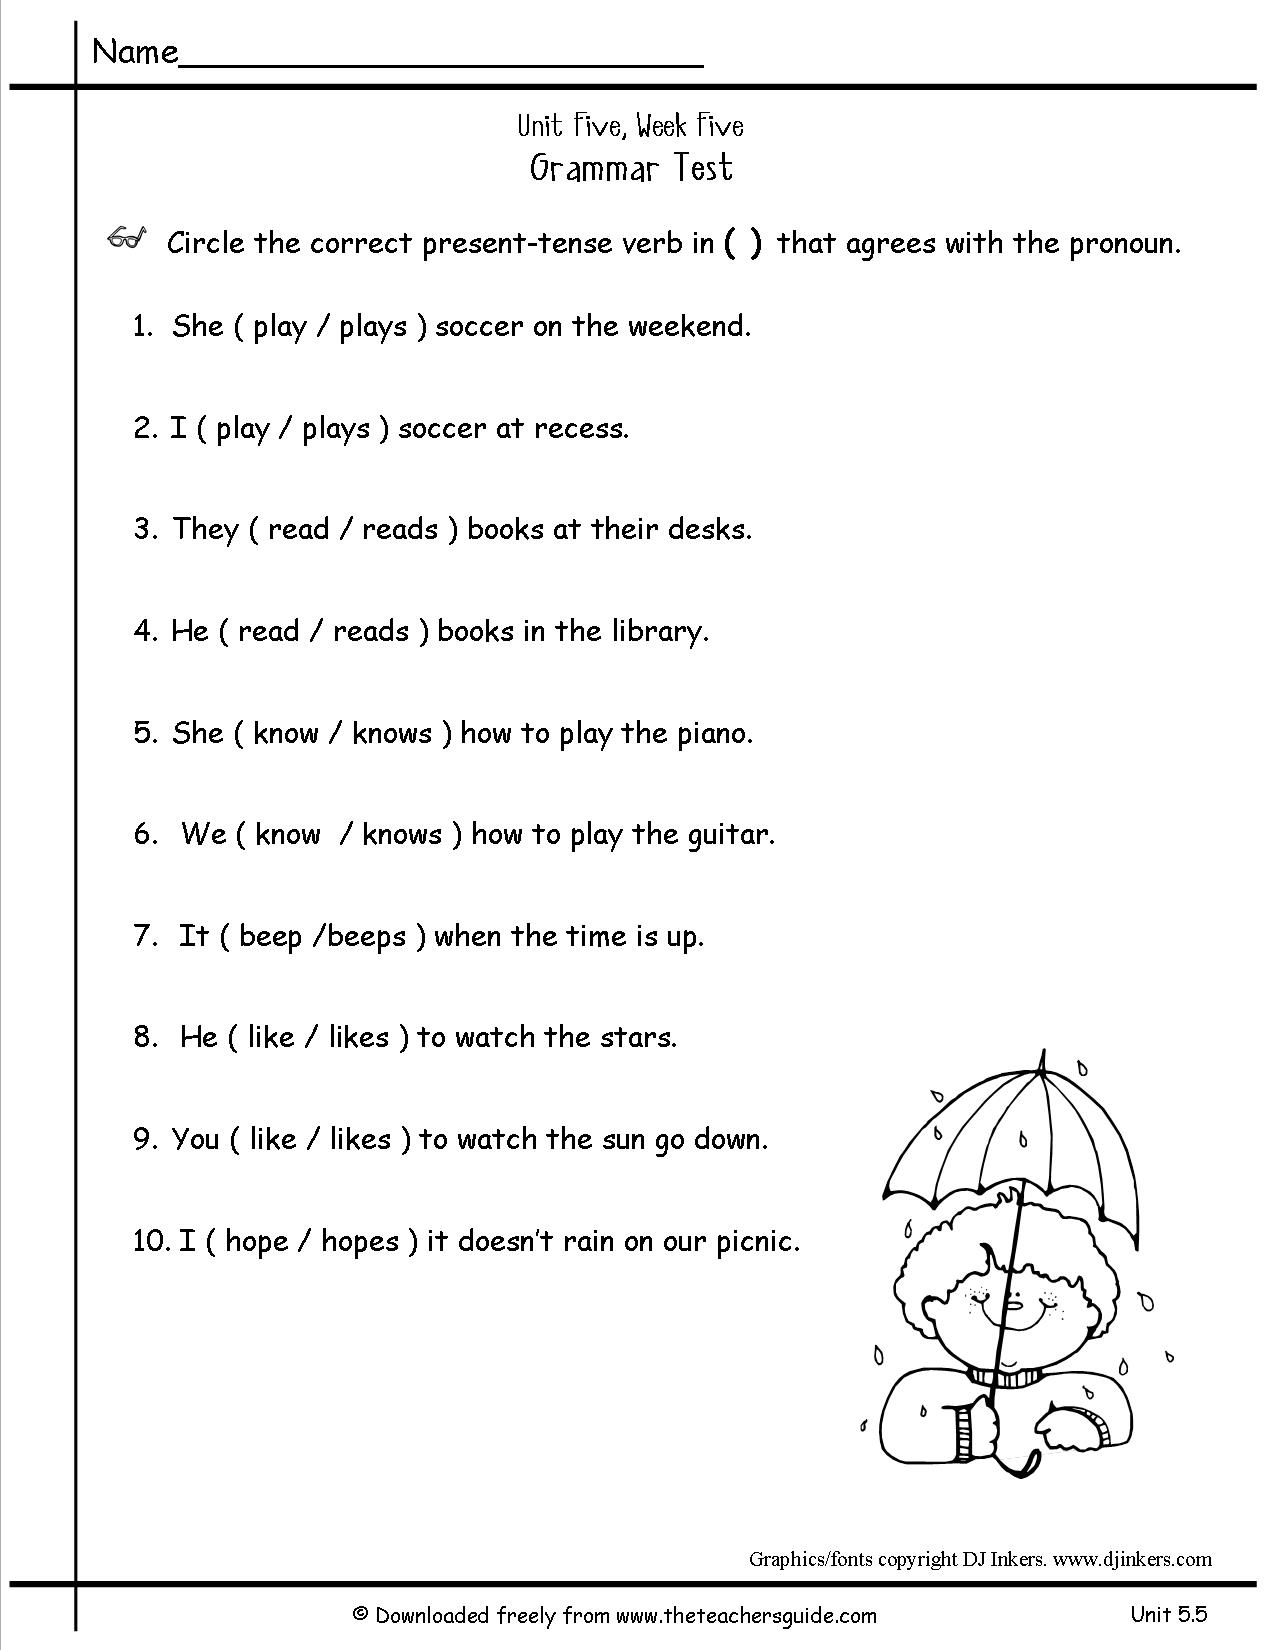 pronouns-and-their-antecedents-worksheet-pronoun-worksheets-free-pronoun-worksheets-nouns